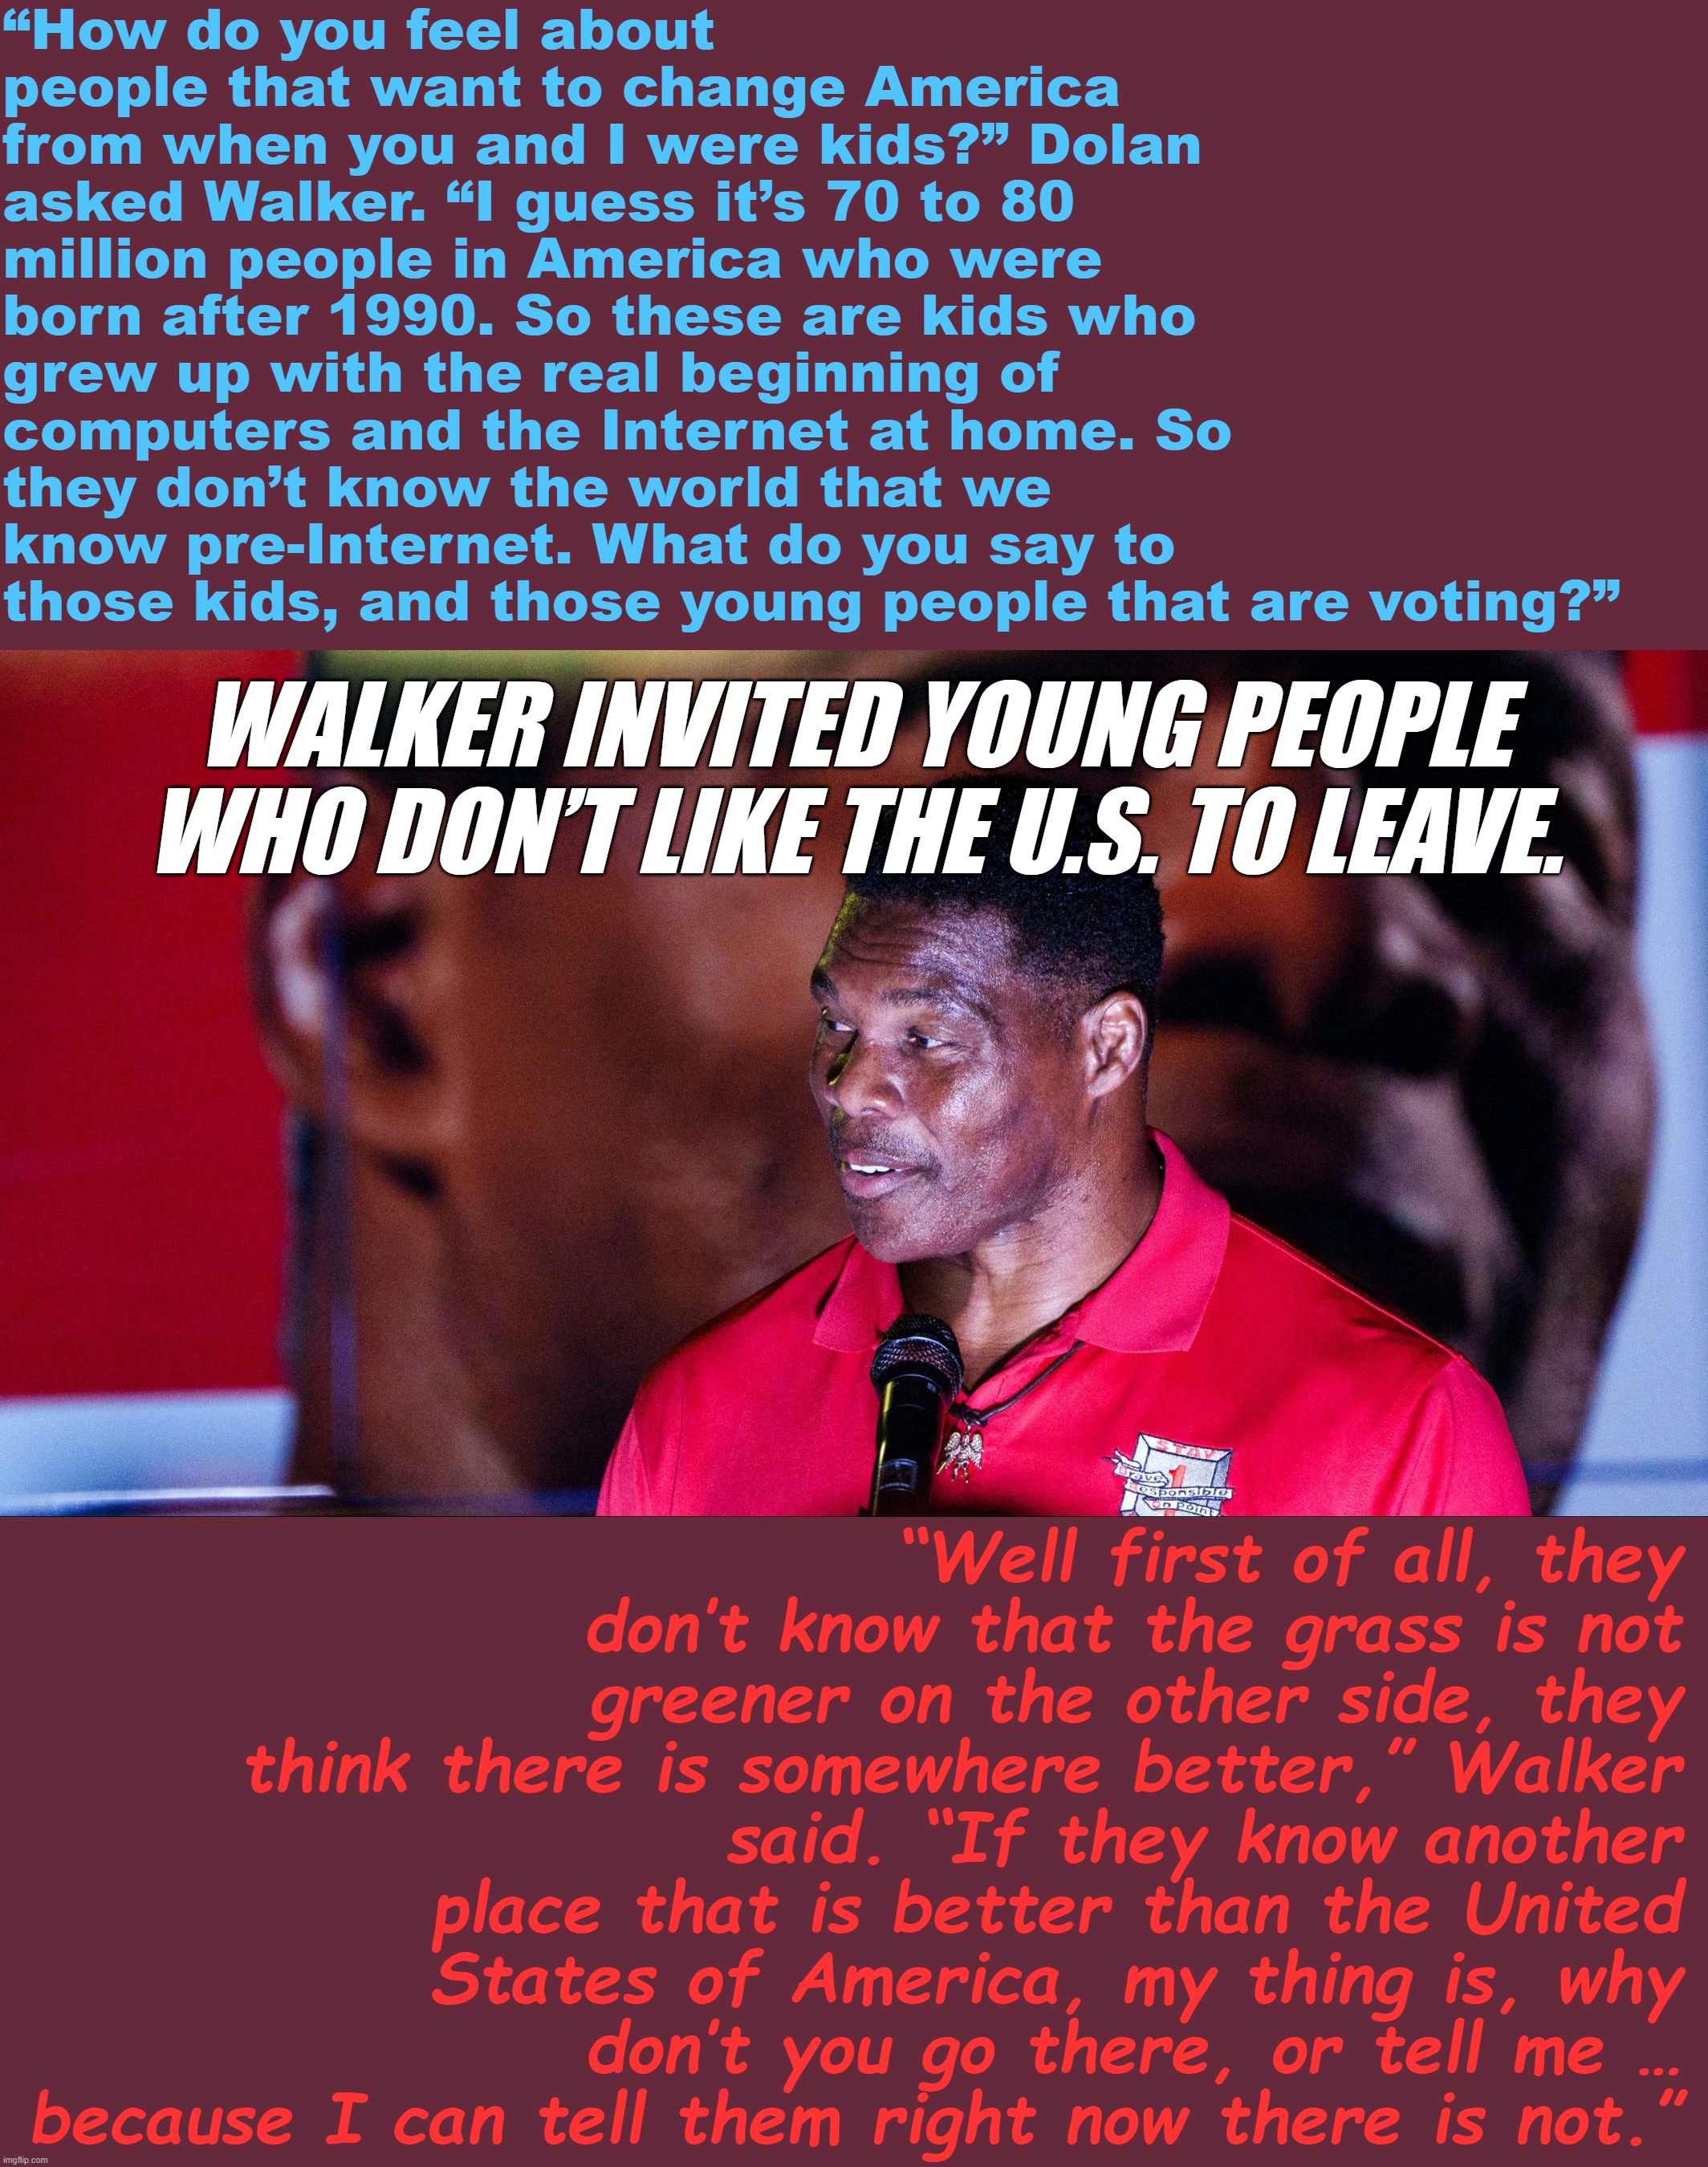 Wow, he really nailed the "punch-down-at-and-slime-as-unpatriotic-any-young-person-seeking-change" GOP talking point | “How do you feel about people that want to change America from when you and I were kids?” Dolan asked Walker. “I guess it’s 70 to 80 million people in America who were born after 1990. So these are kids who grew up with the real beginning of computers and the Internet at home. So they don’t know the world that we know pre-Internet. What do you say to those kids, and those young people that are voting?”; WALKER INVITED YOUNG PEOPLE WHO DON’T LIKE THE U.S. TO LEAVE. “Well first of all, they don’t know that the grass is not greener on the other side, they think there is somewhere better,” Walker said. “If they know another place that is better than the United States of America, my thing is, why don’t you go there, or tell me … because I can tell them right now there is not.” | image tagged in herschel walker demagogue,herschel walker,bold move,sir,conservative logic,georgia | made w/ Imgflip meme maker